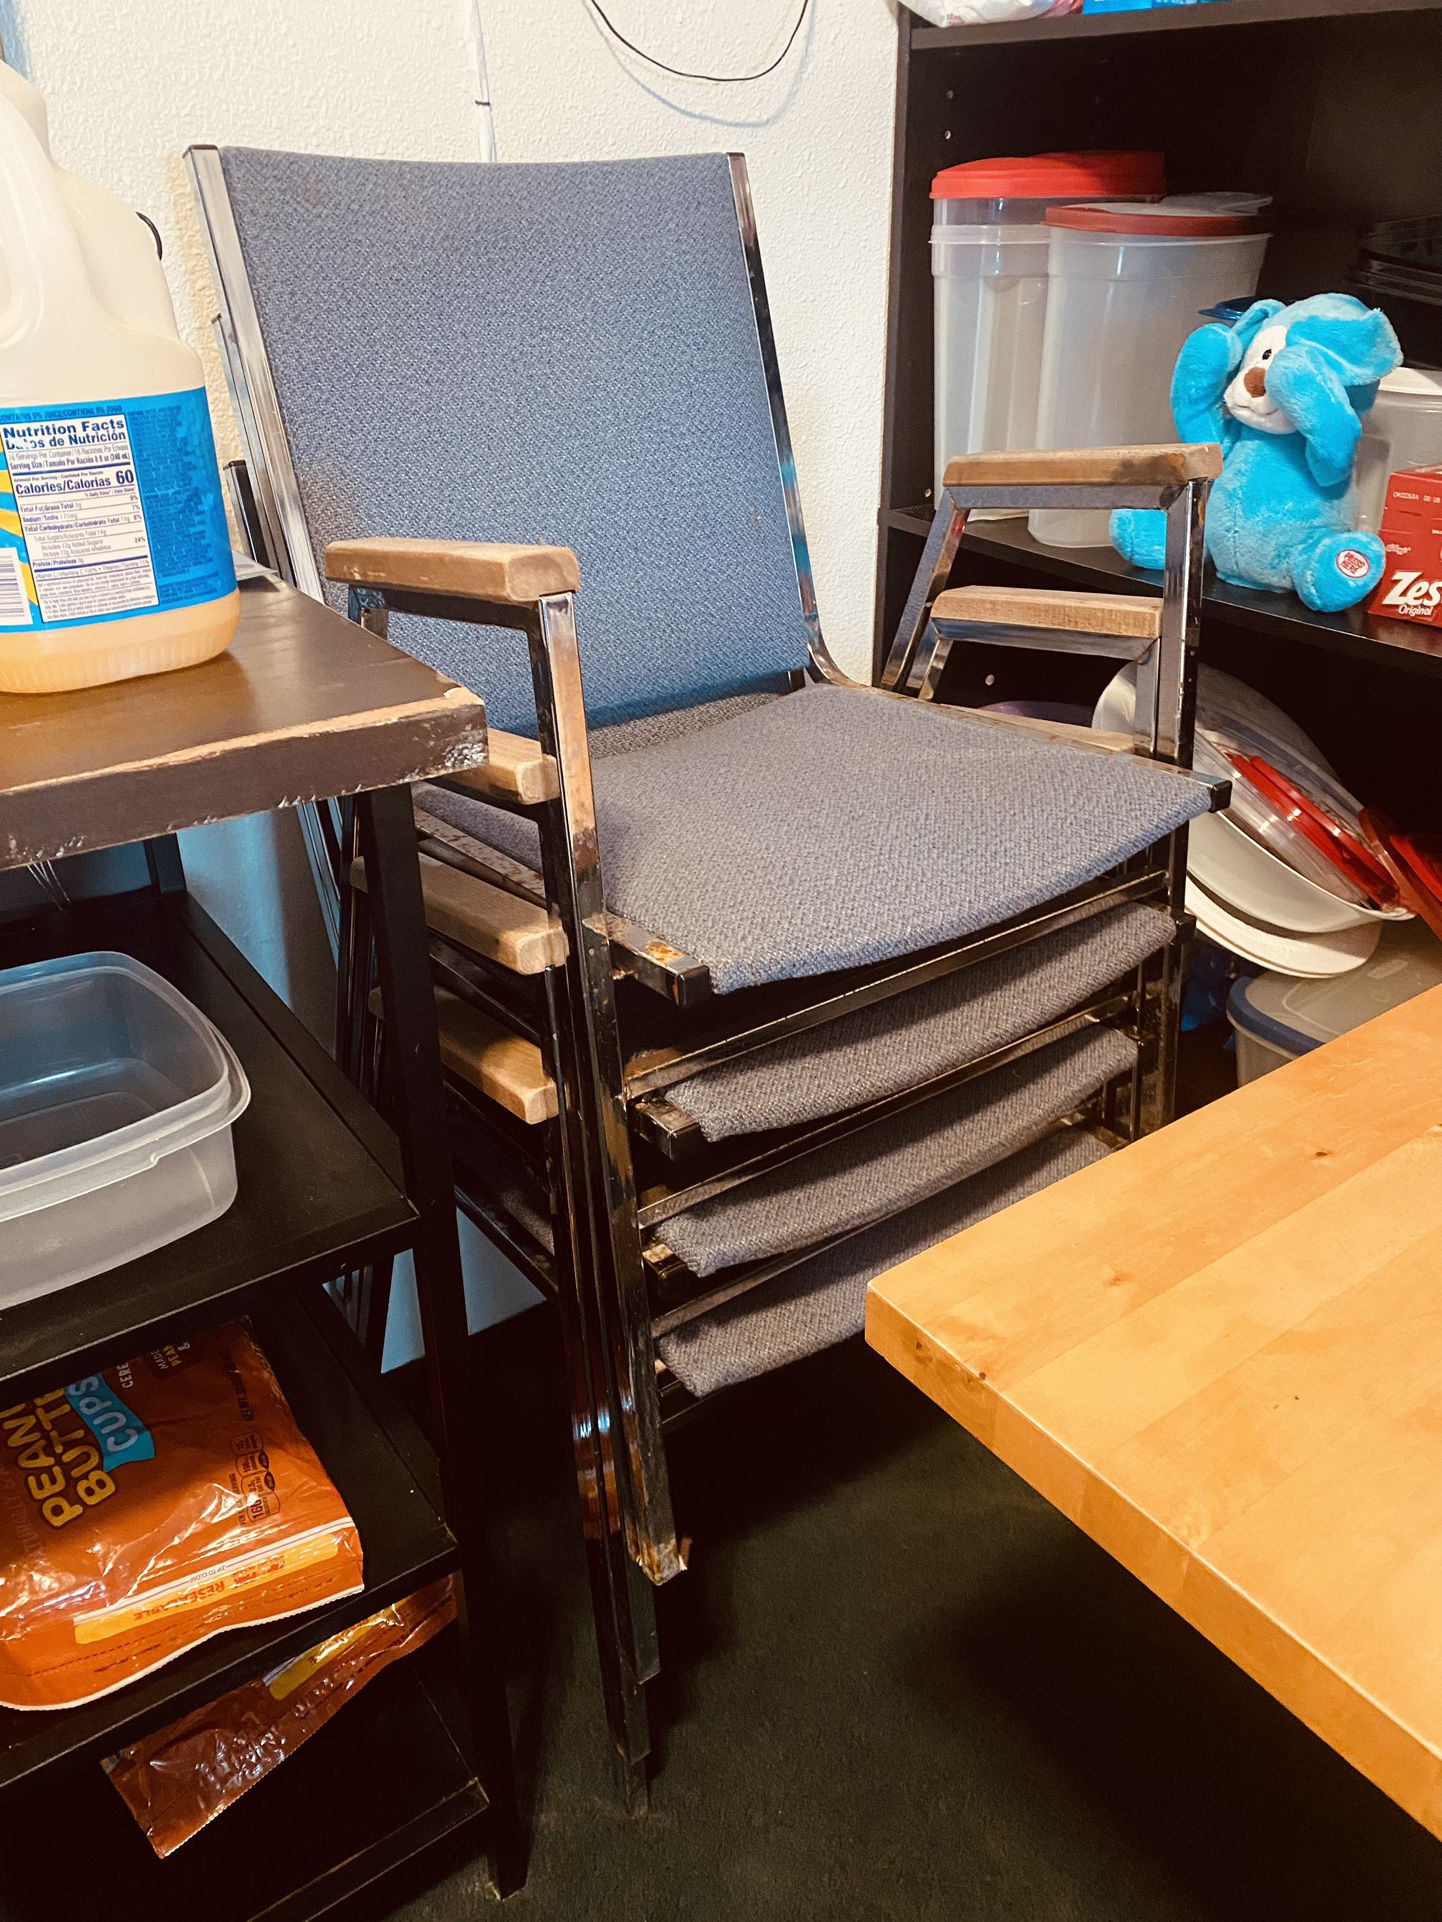 $50 for ALL  6-  Older style office chairs- (2 pink 4 blue) have some rust but still very useable (fair condition and priced as such). May need a few 